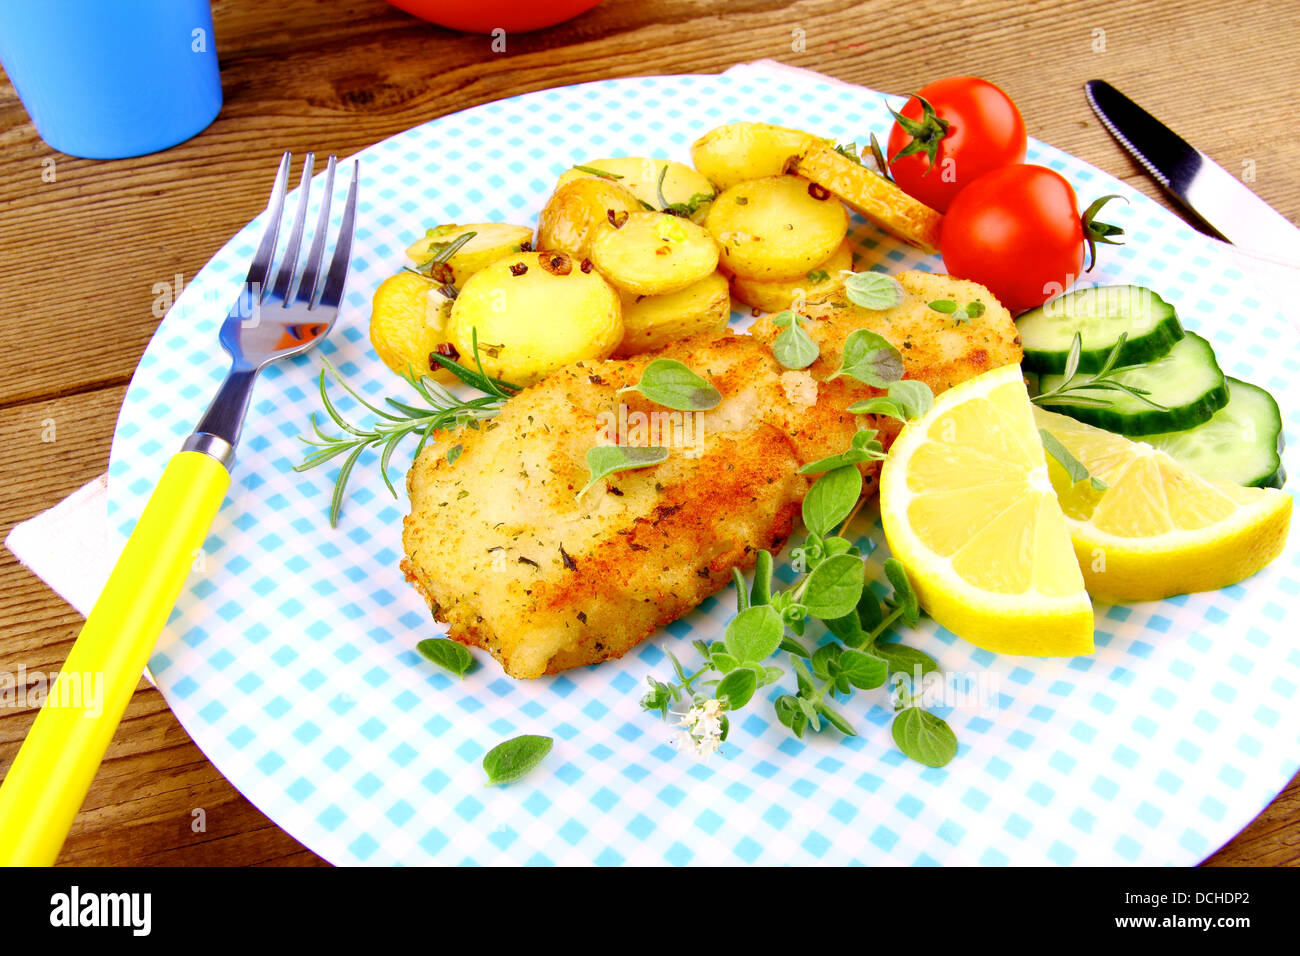 Fried fish fillet with rosemary potatoes and vegetables, close up Stock Photo